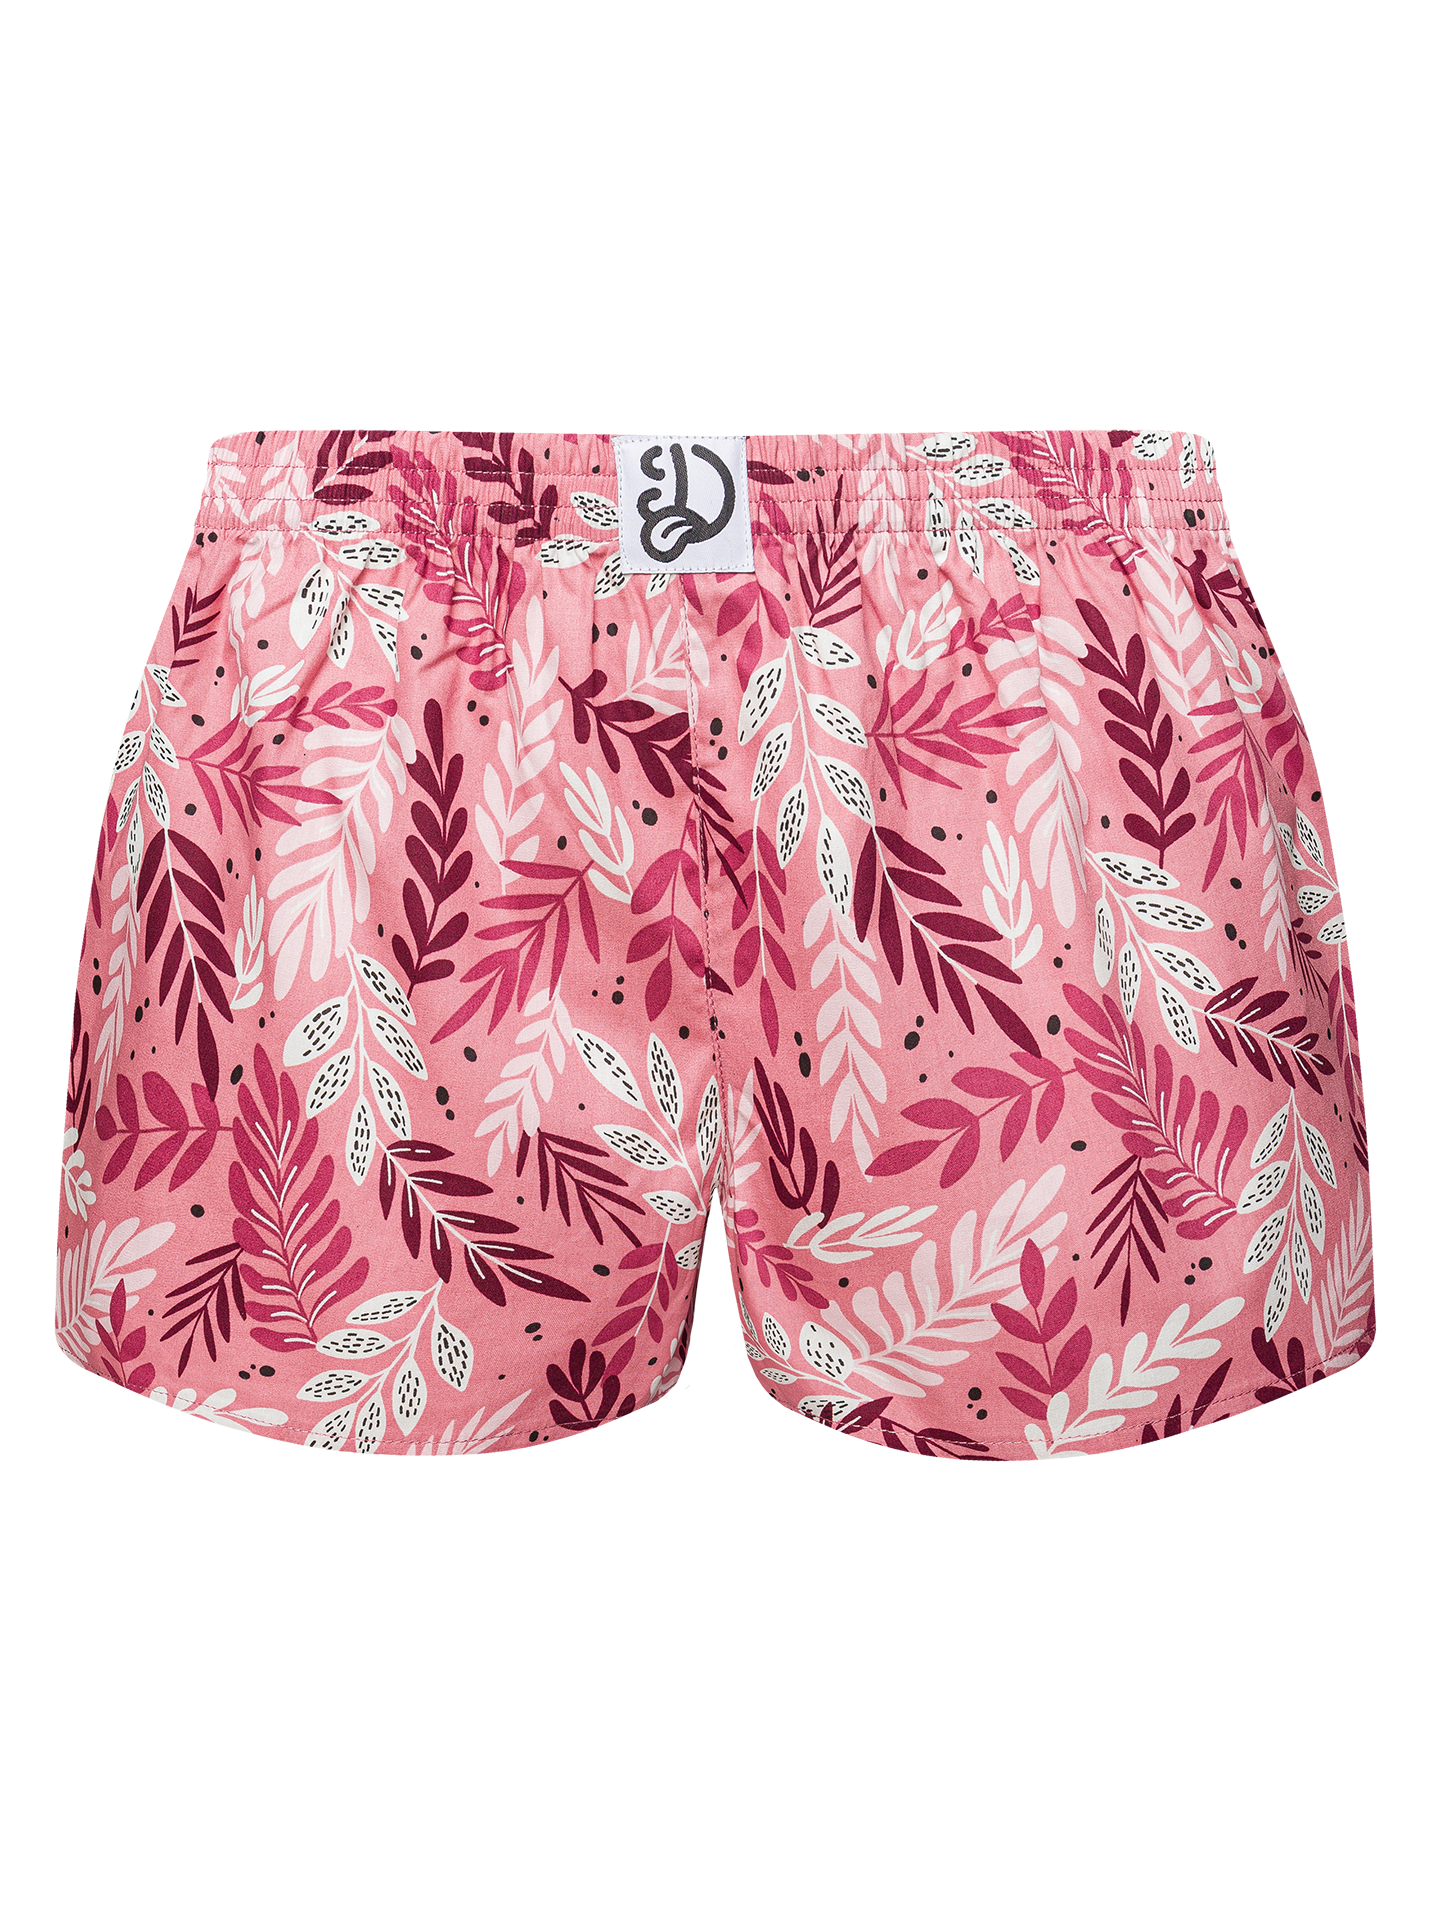 Women's Boxer Shorts Pink Leaves